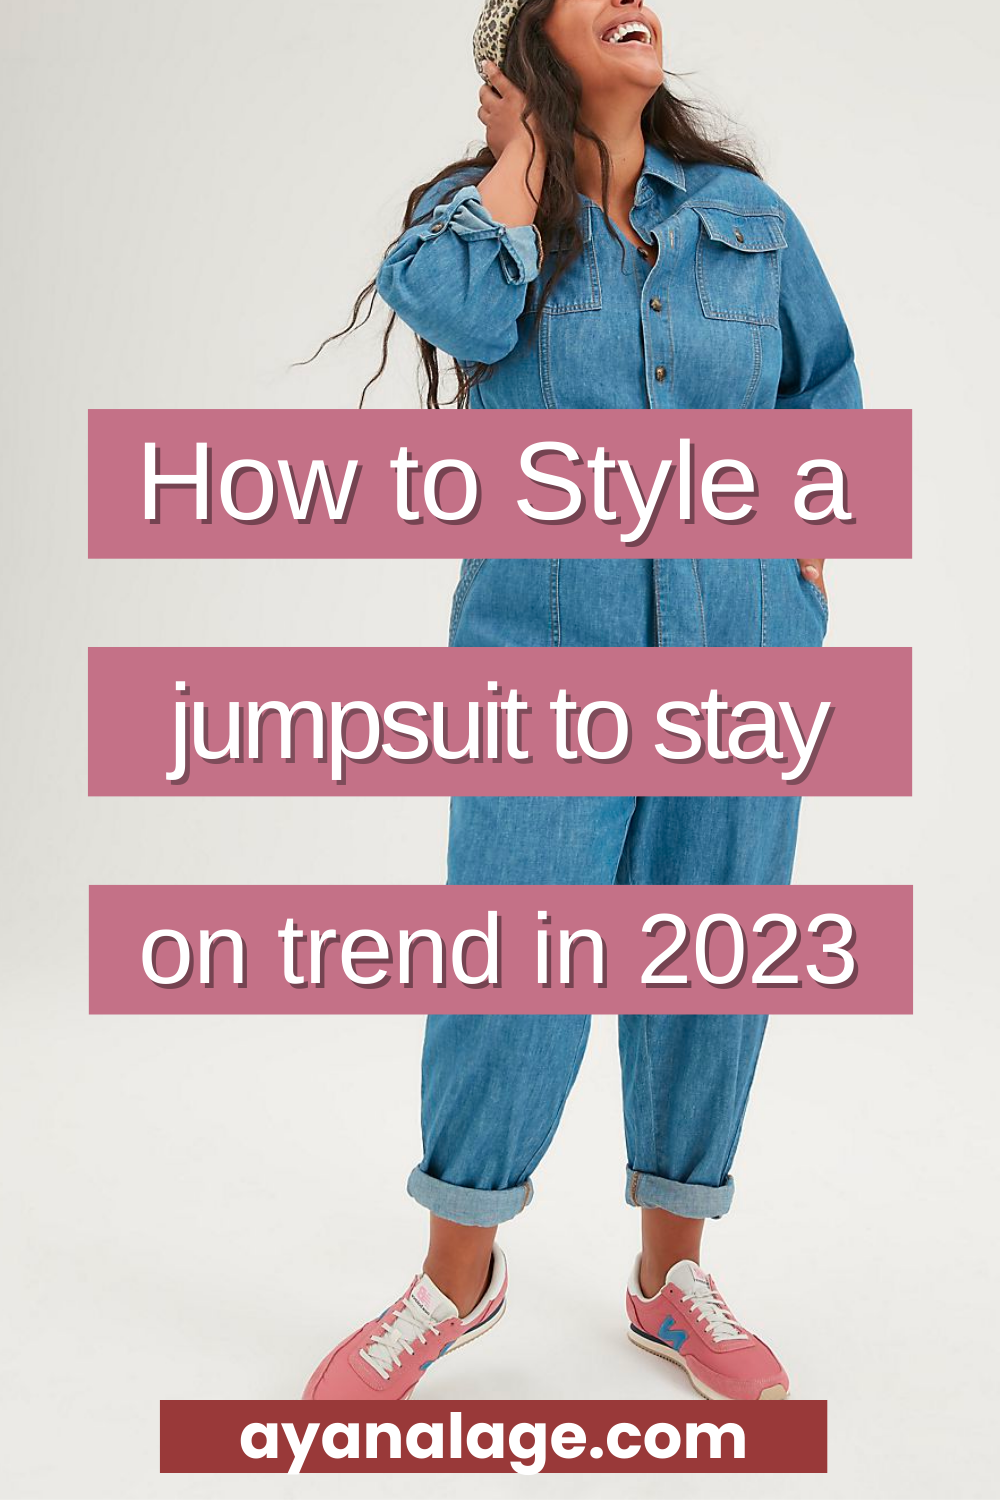 Best Jumpsuit Outfit Ideas and Women's Fashion Advice